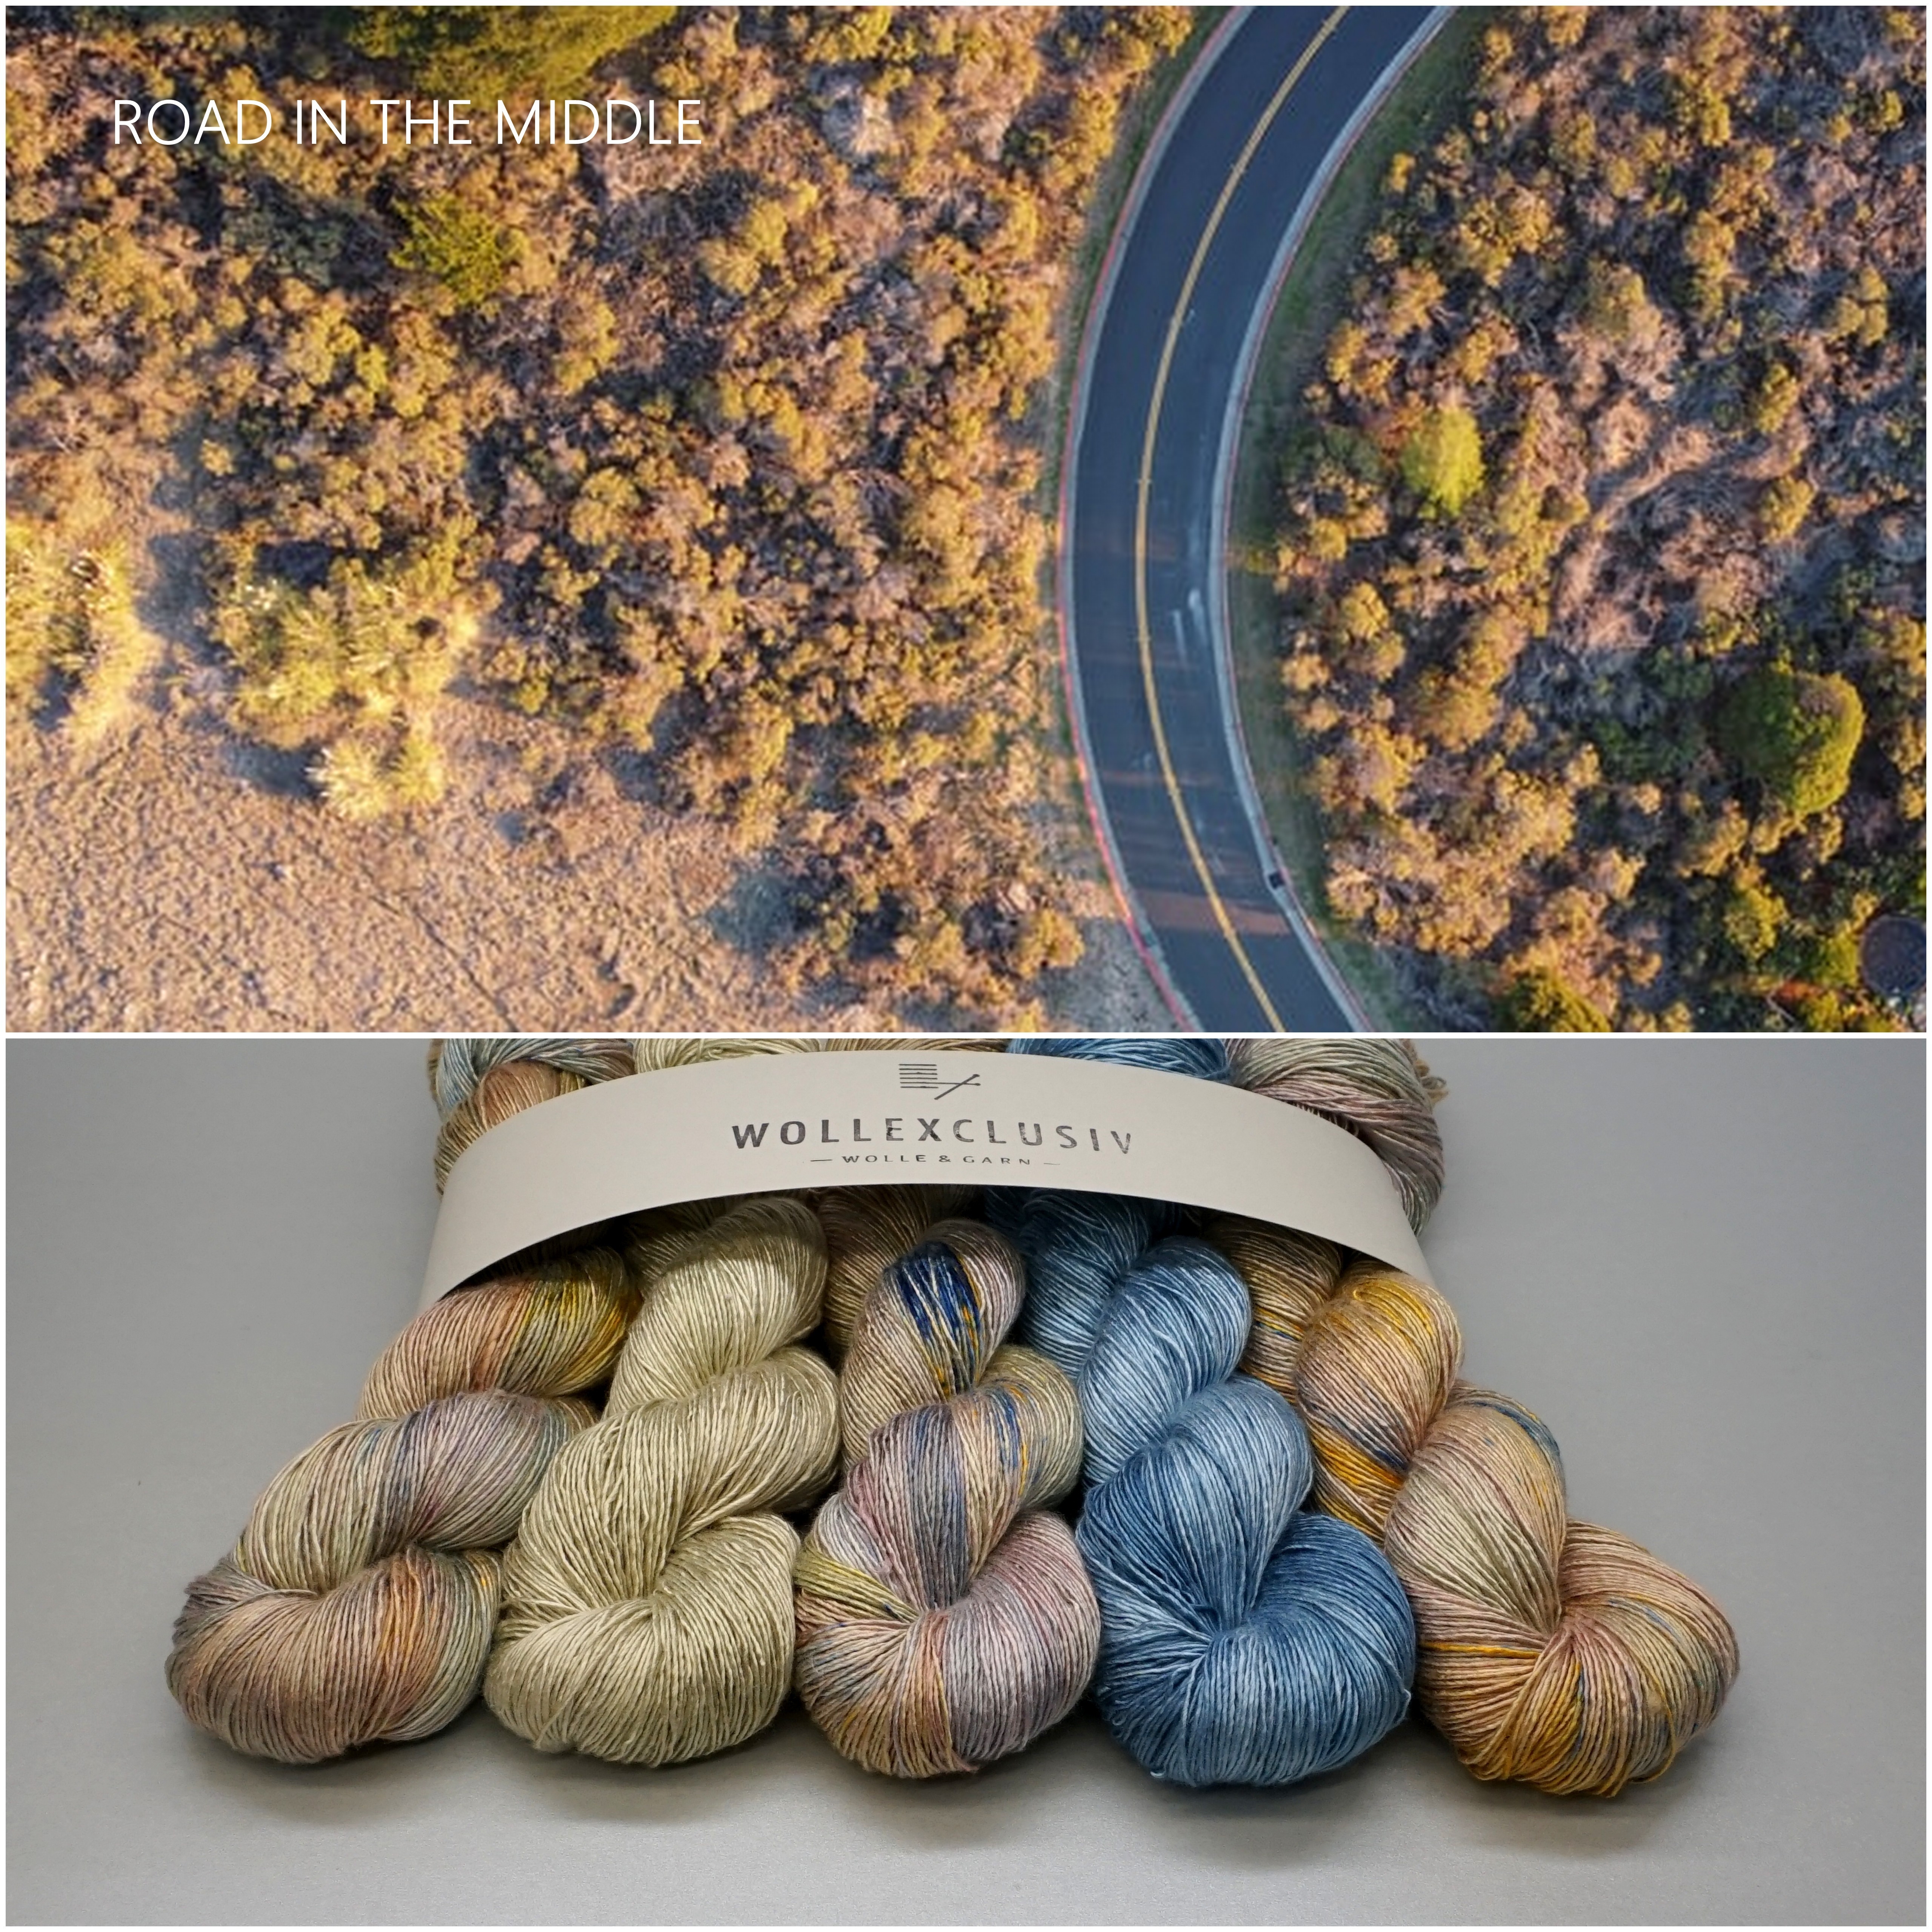 WOLLEXCLUSIV KIT ∣ MULBERRY SILK SINGLE ∣ ROAD IN THE MIDDLE